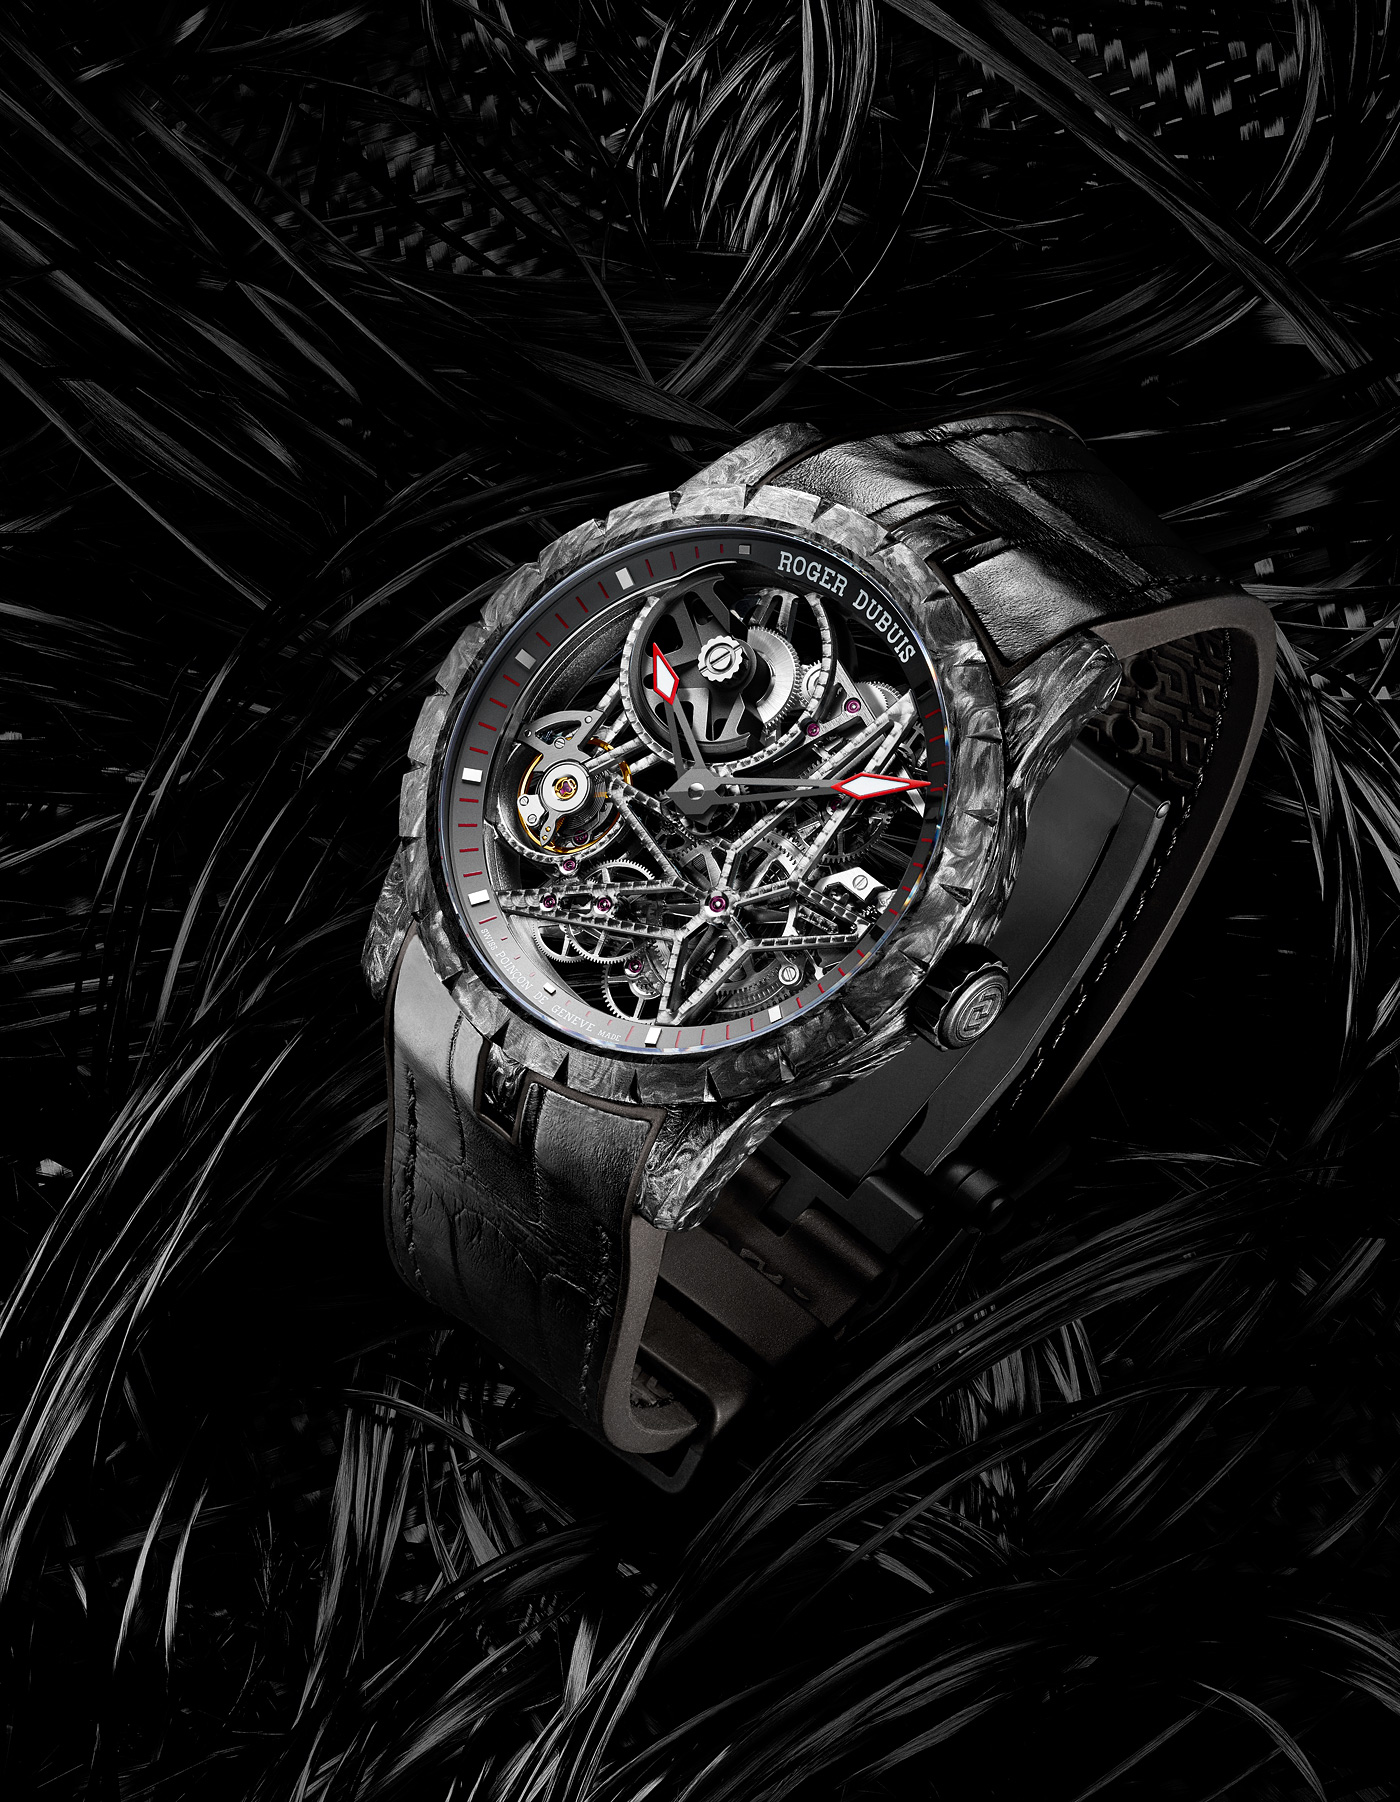 Roger-Dubuis-RD820SQ-Excalibur-04